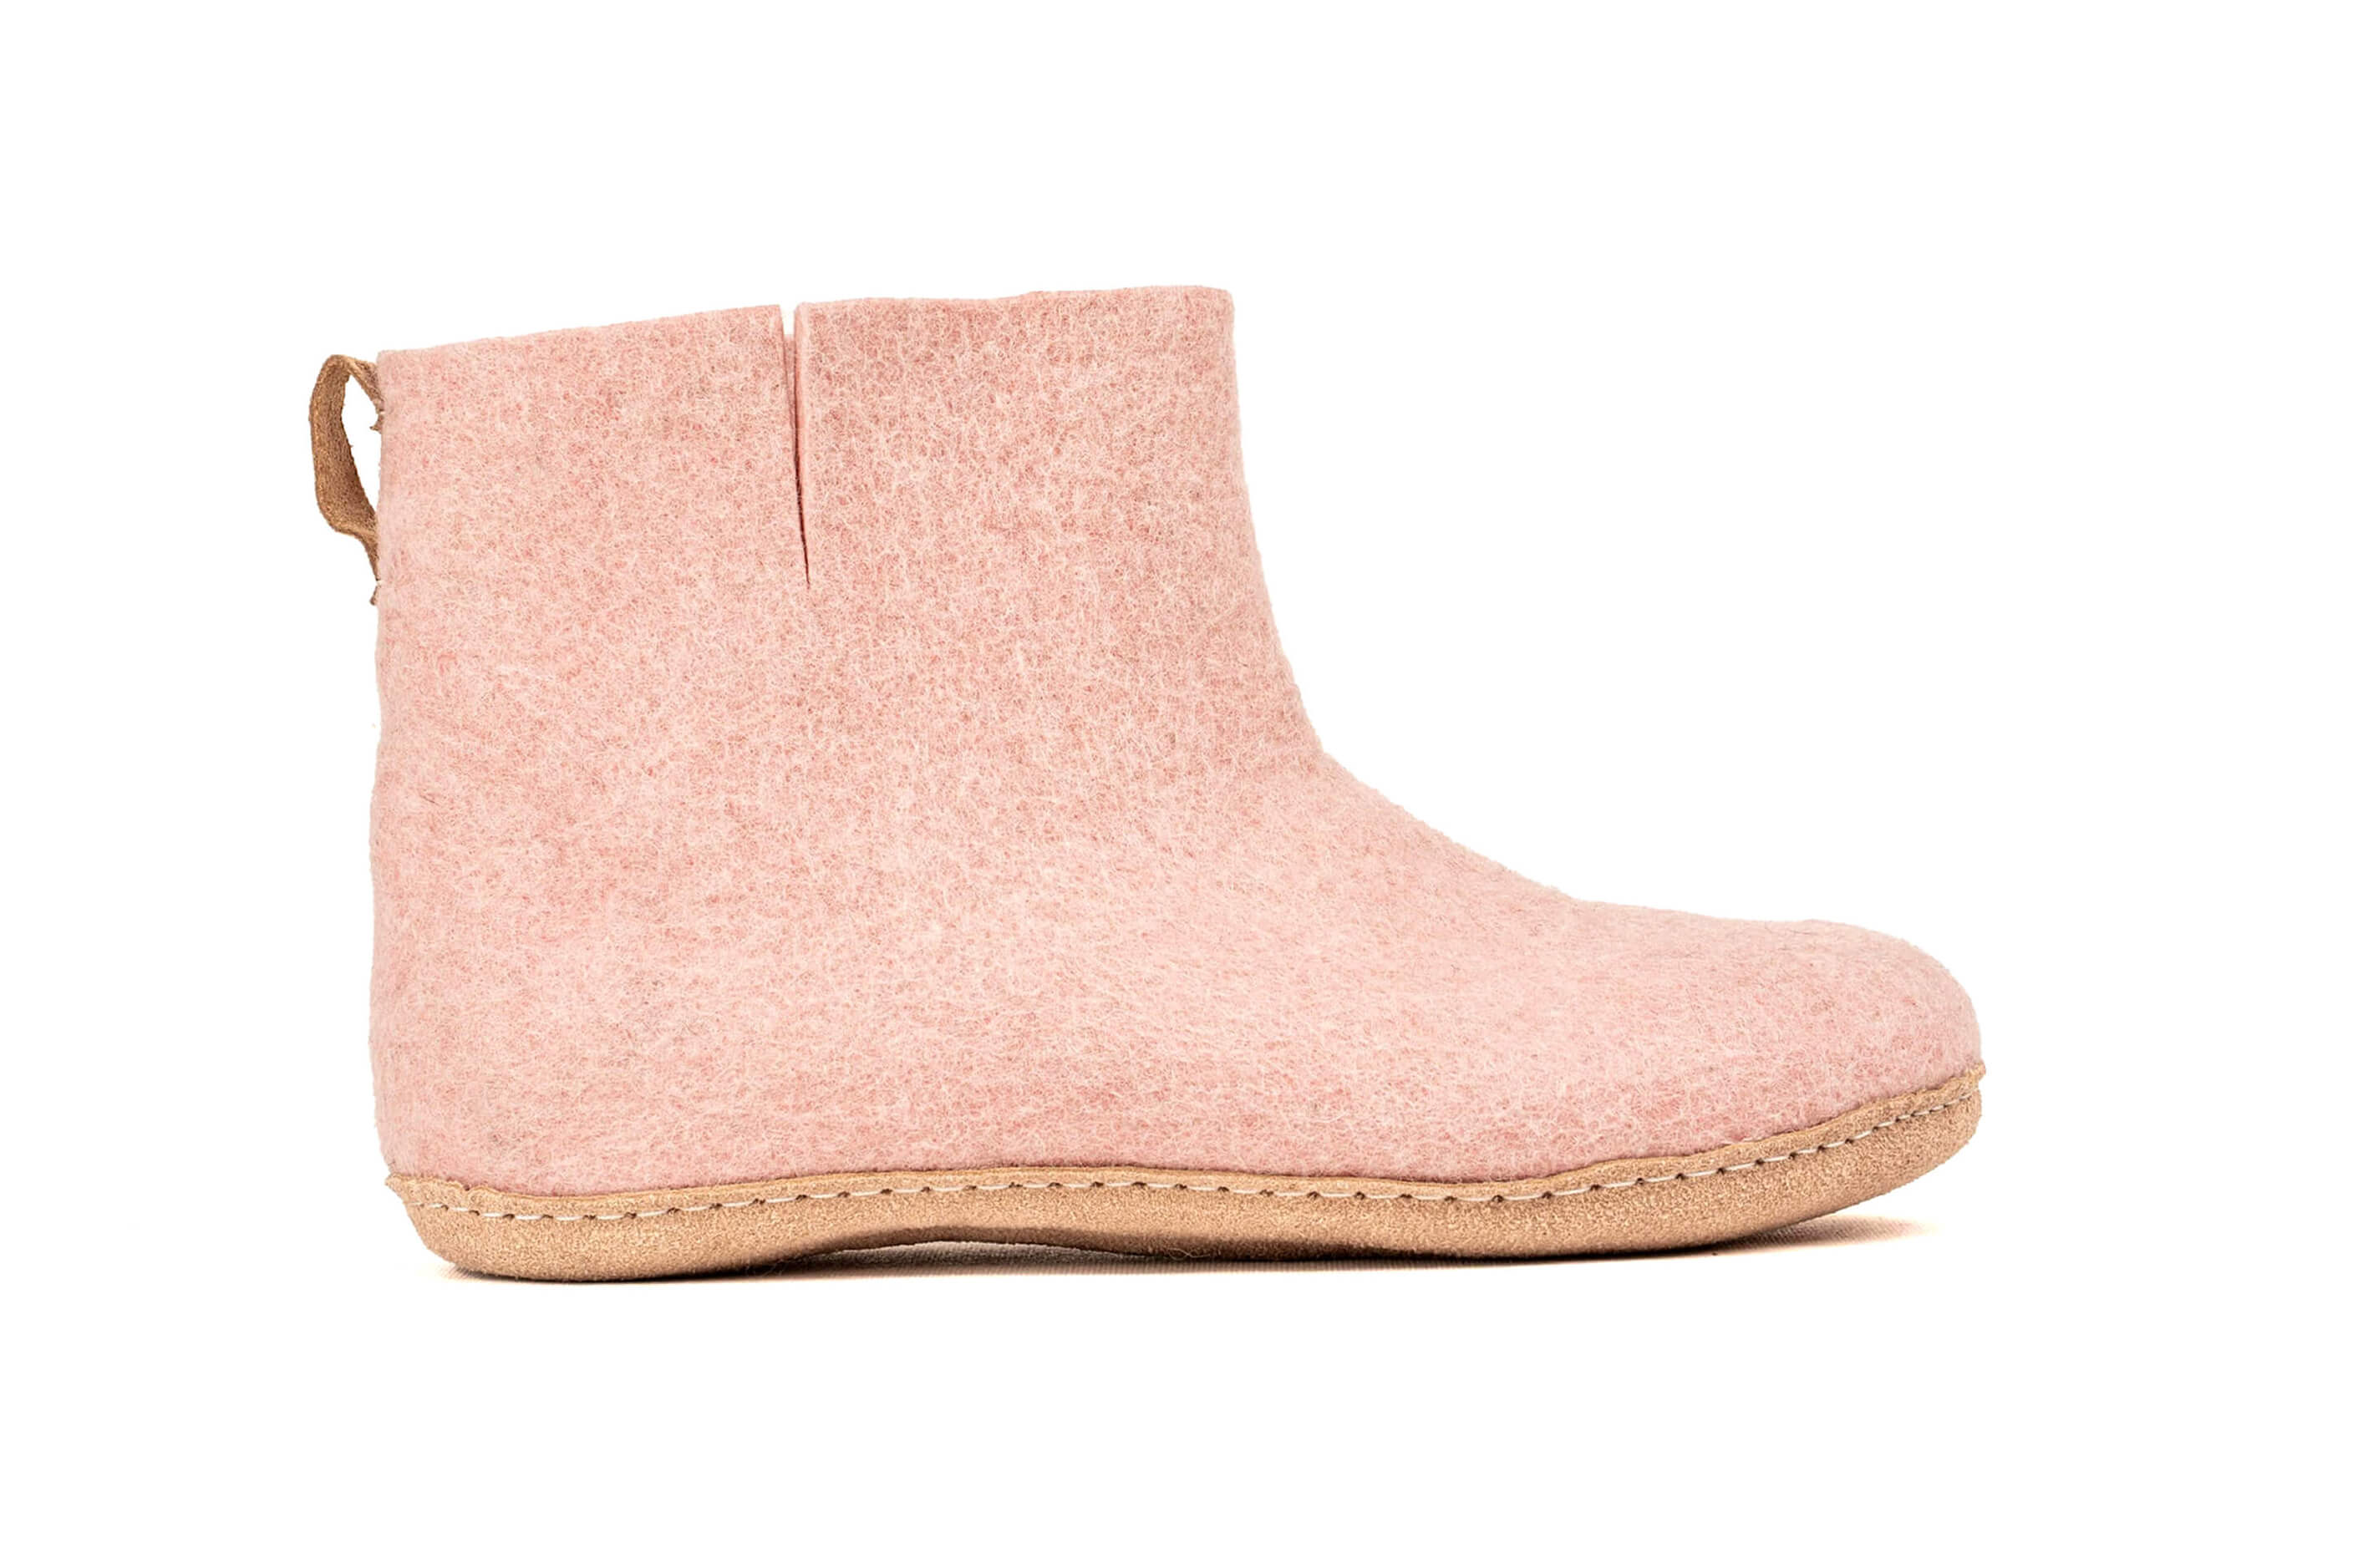 Indoor Boots With Leather Sole - Baby Pink